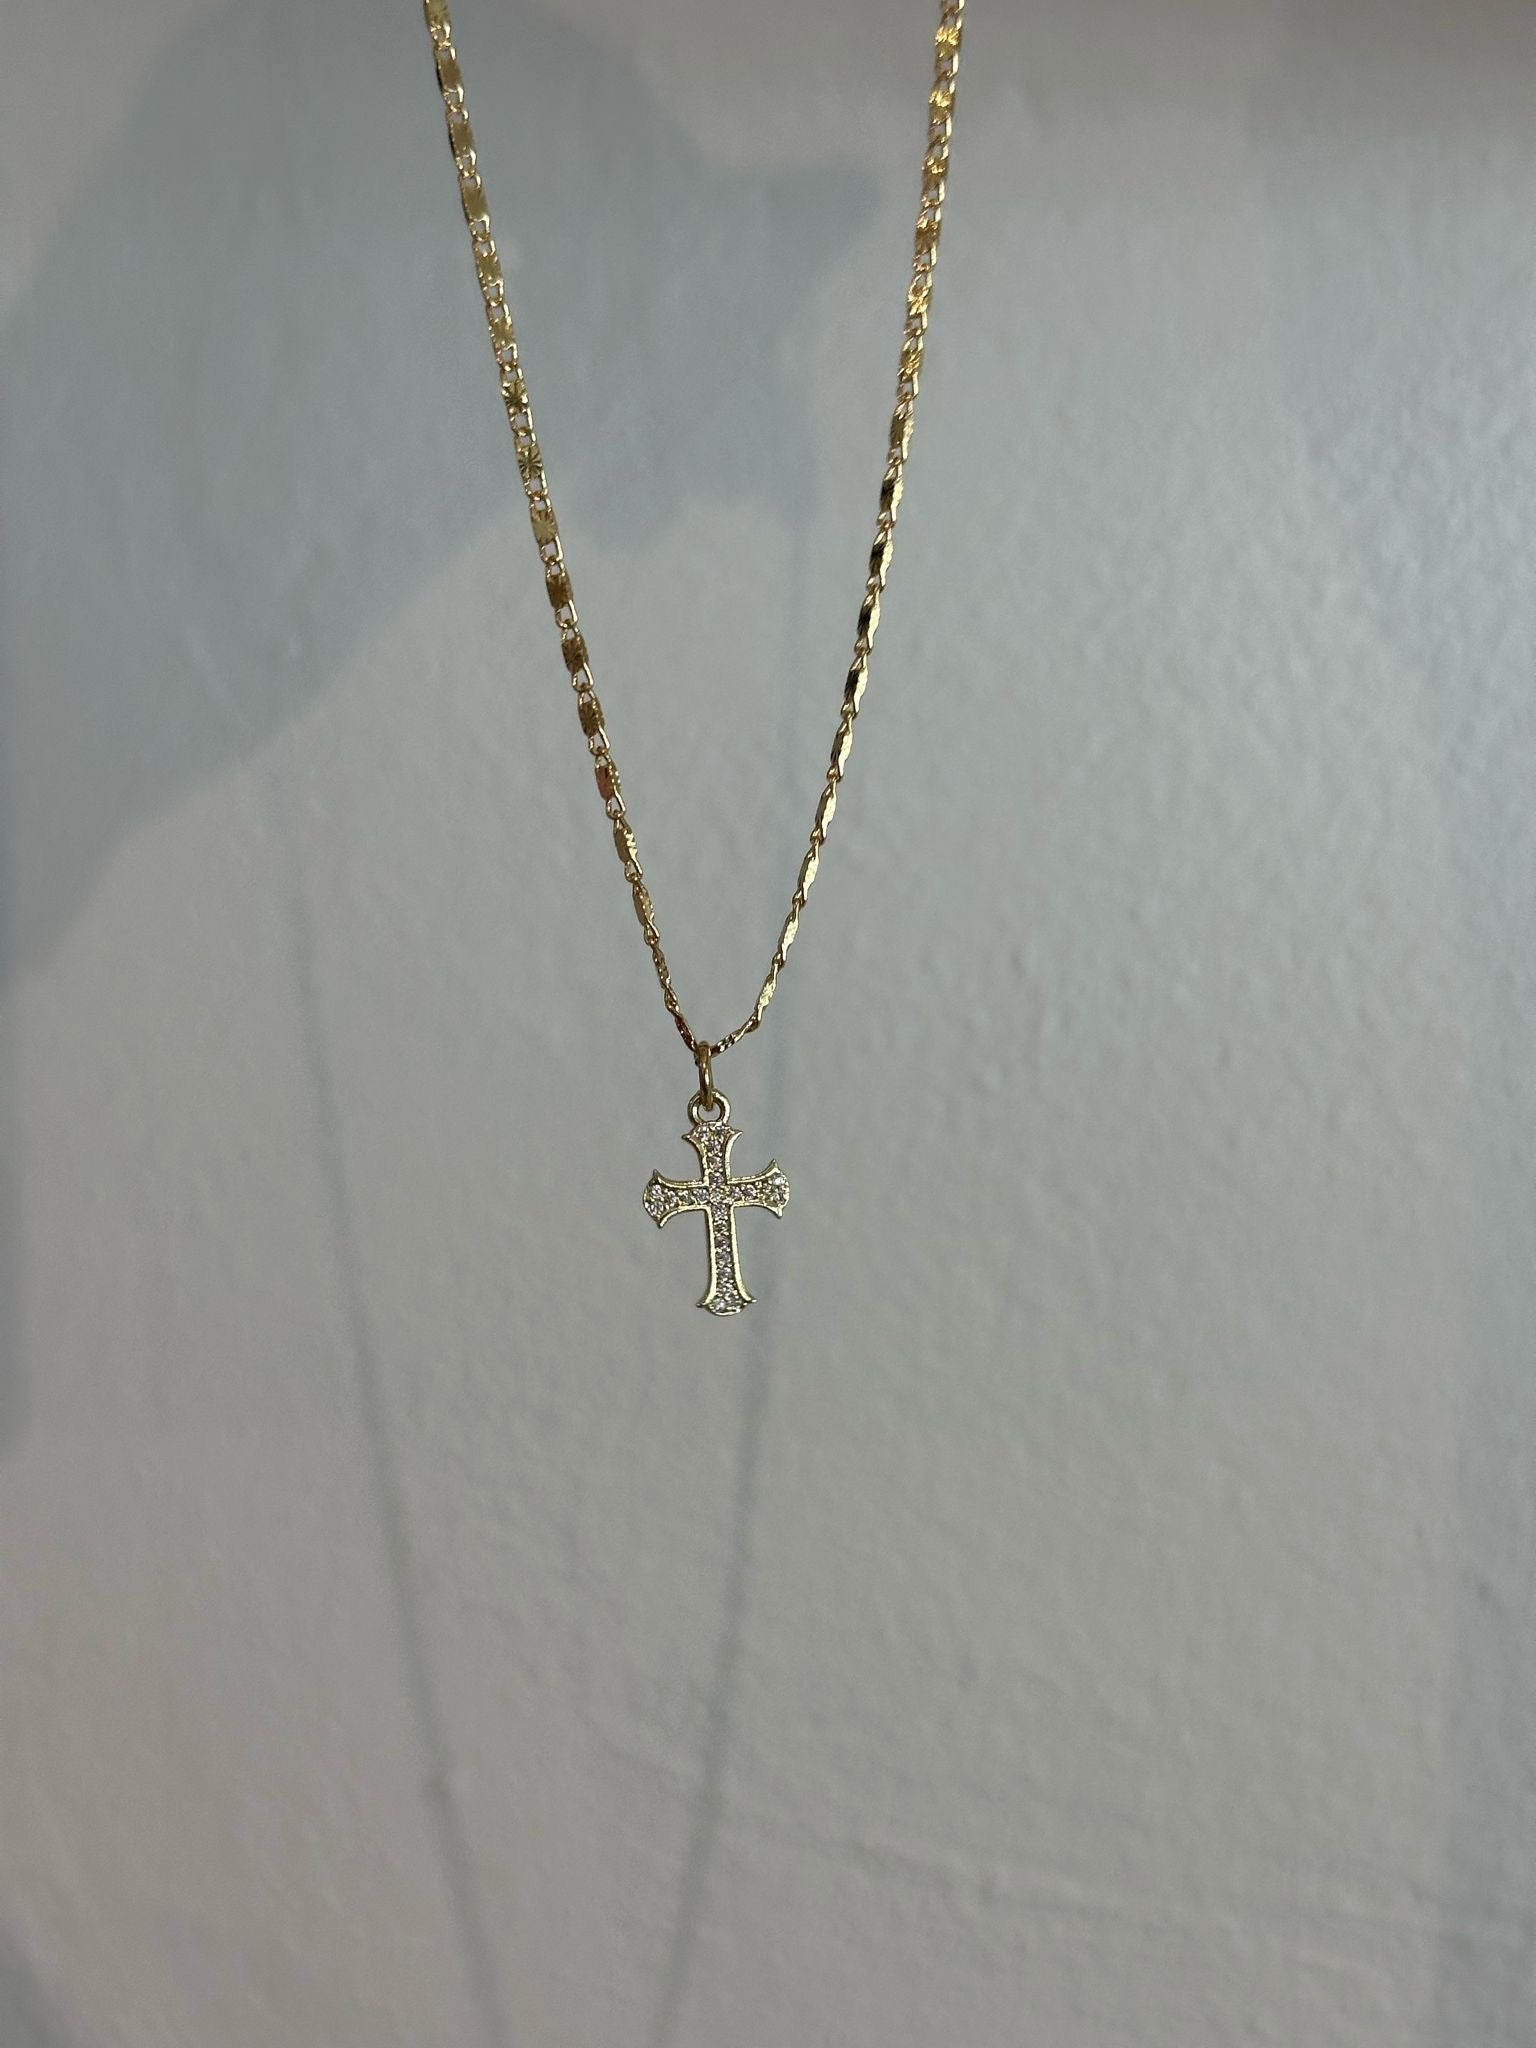 #75 DAINTY CROSS NECKLACE CPSTATEMENT